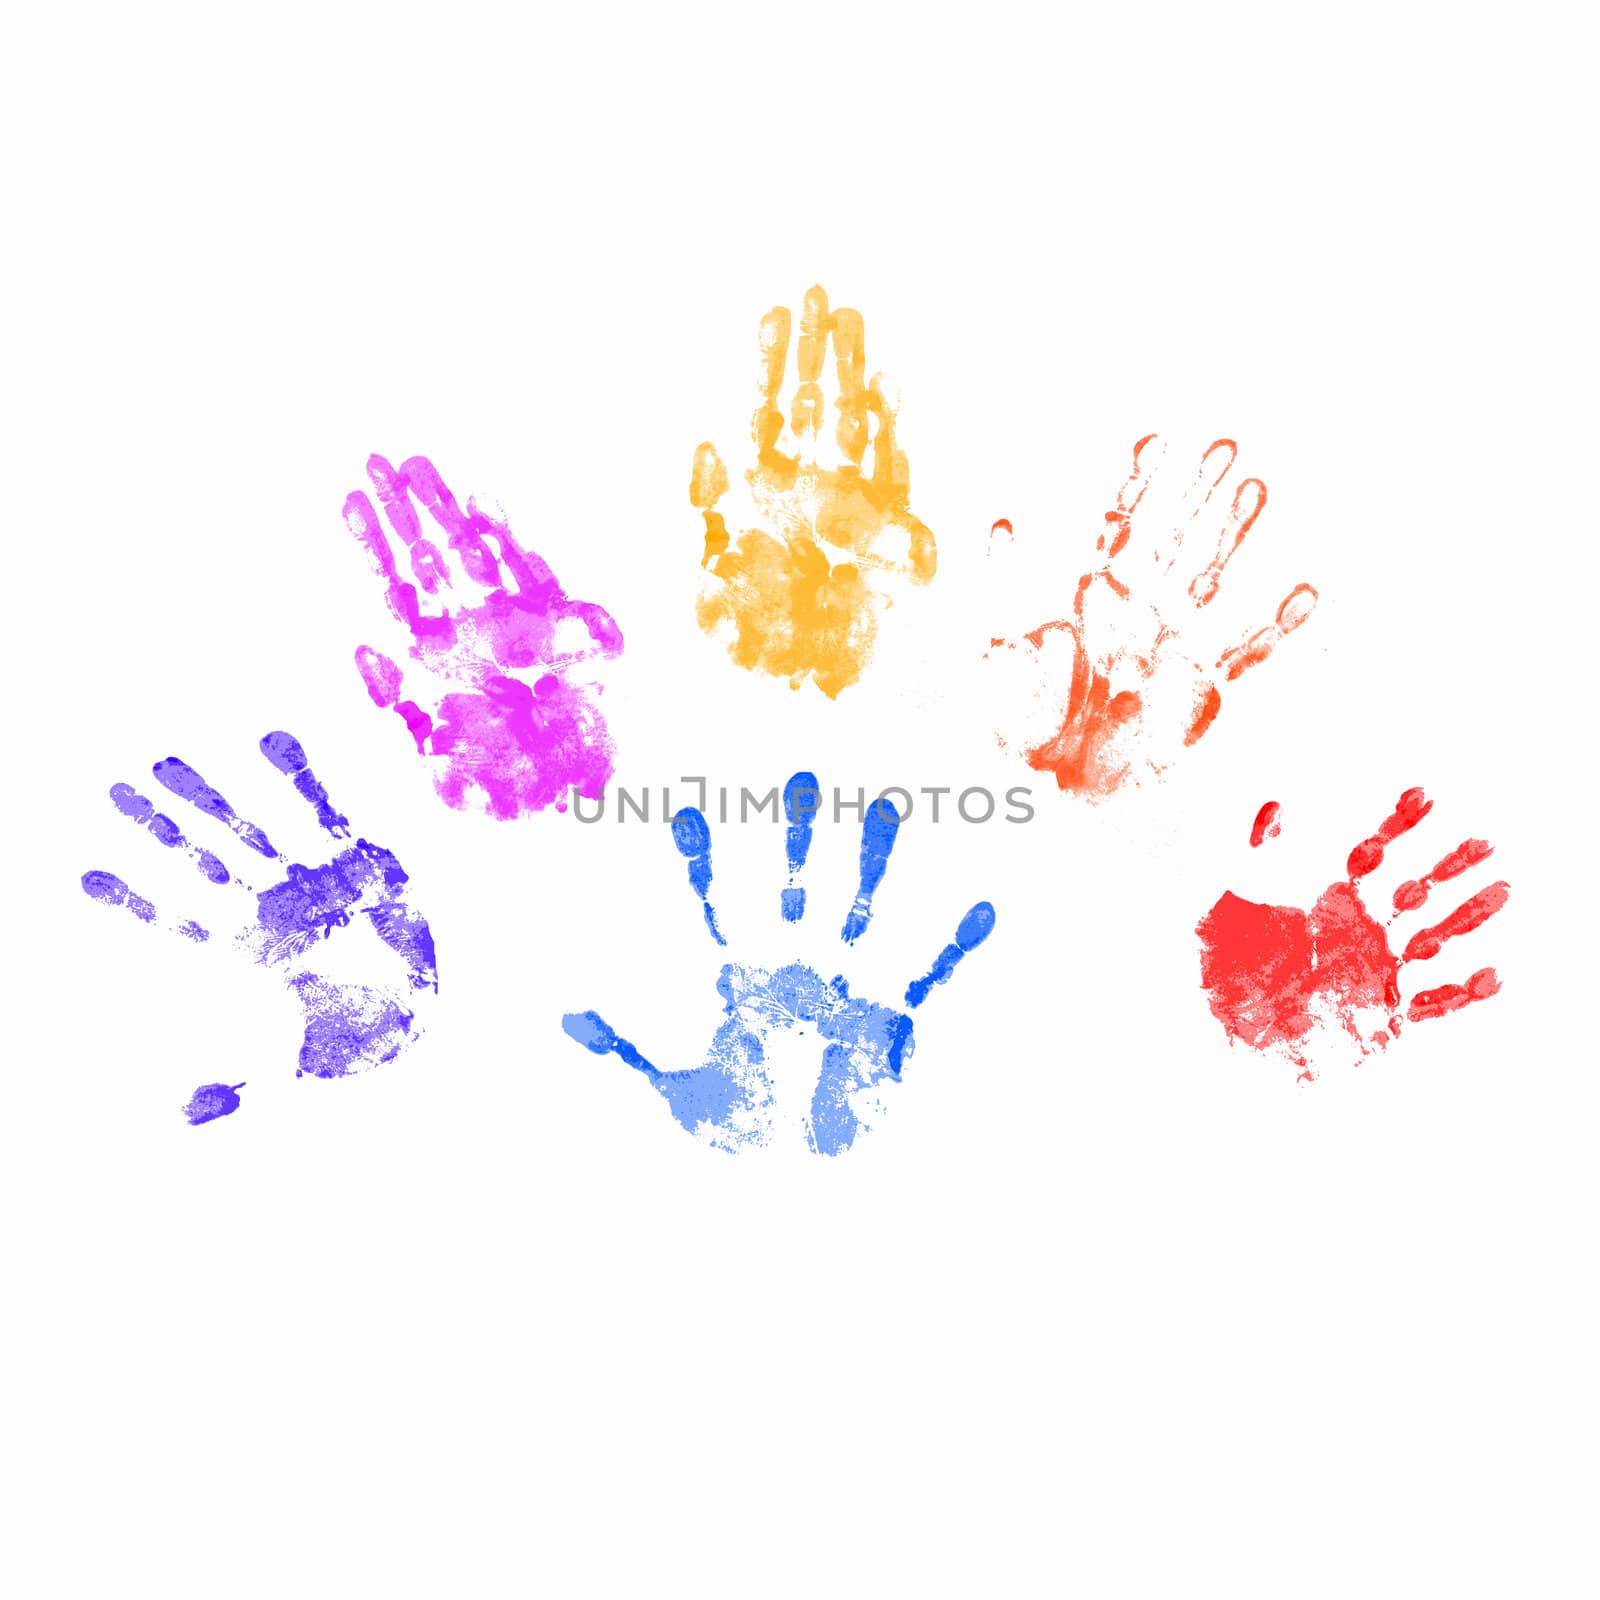 Colourful prints of human hands by sergey_nivens